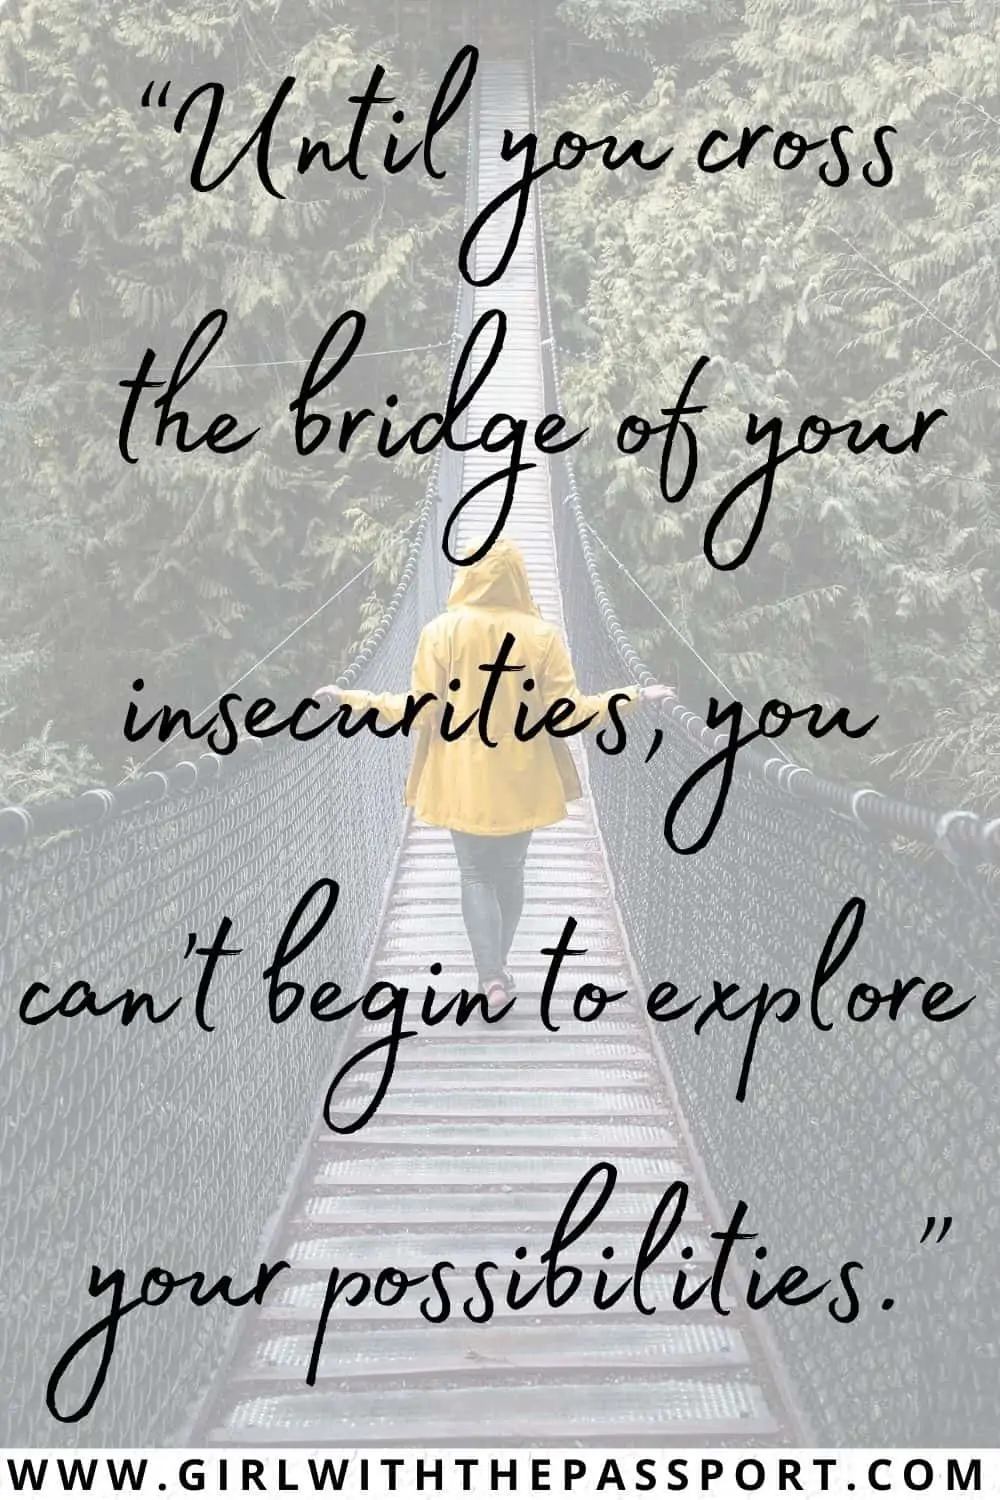 A  girl in a yellow jacket walking across a suspended bridge with trees on either side and an exploration caption that says 'Until you cross the bridge of your insecurities, you can't begin to explore your possibilities.'